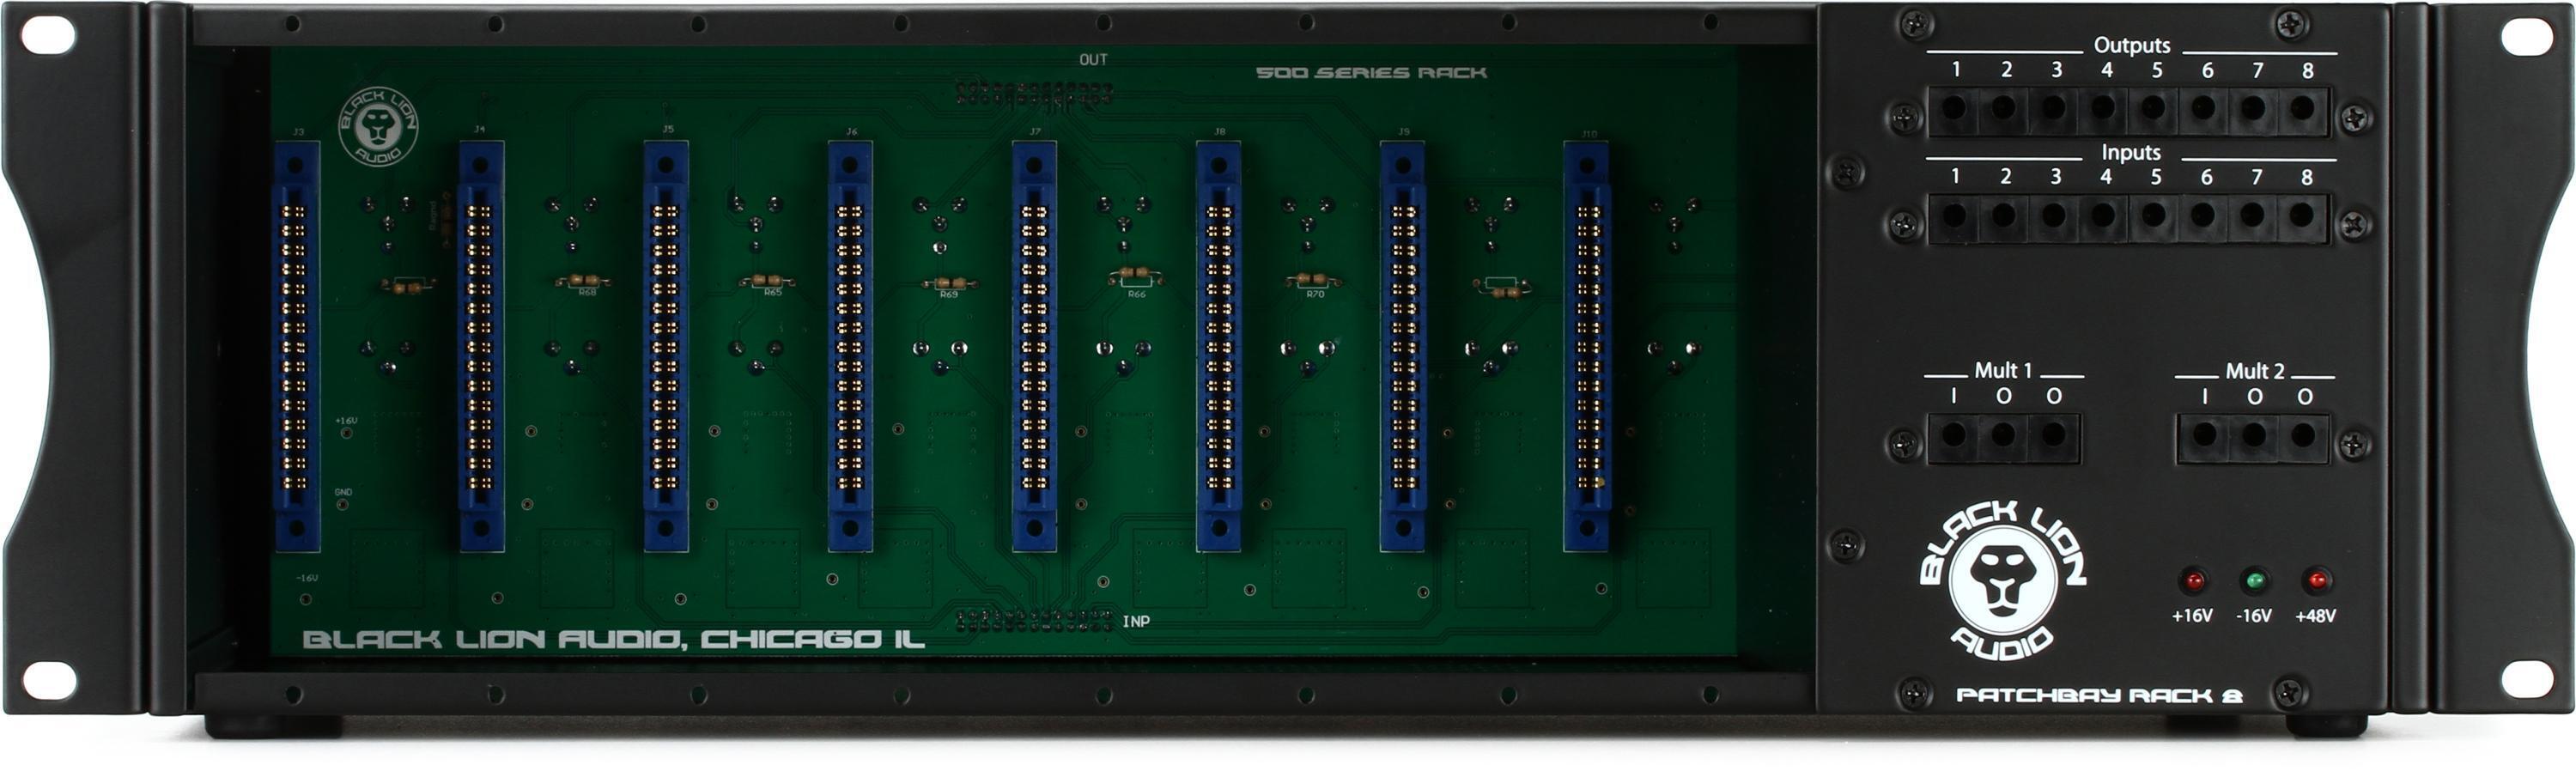 8-Slot　Black　Patchbay　Built-In　Series　Lion　with　Rack　Audio　500　PBR8　Sweetwater